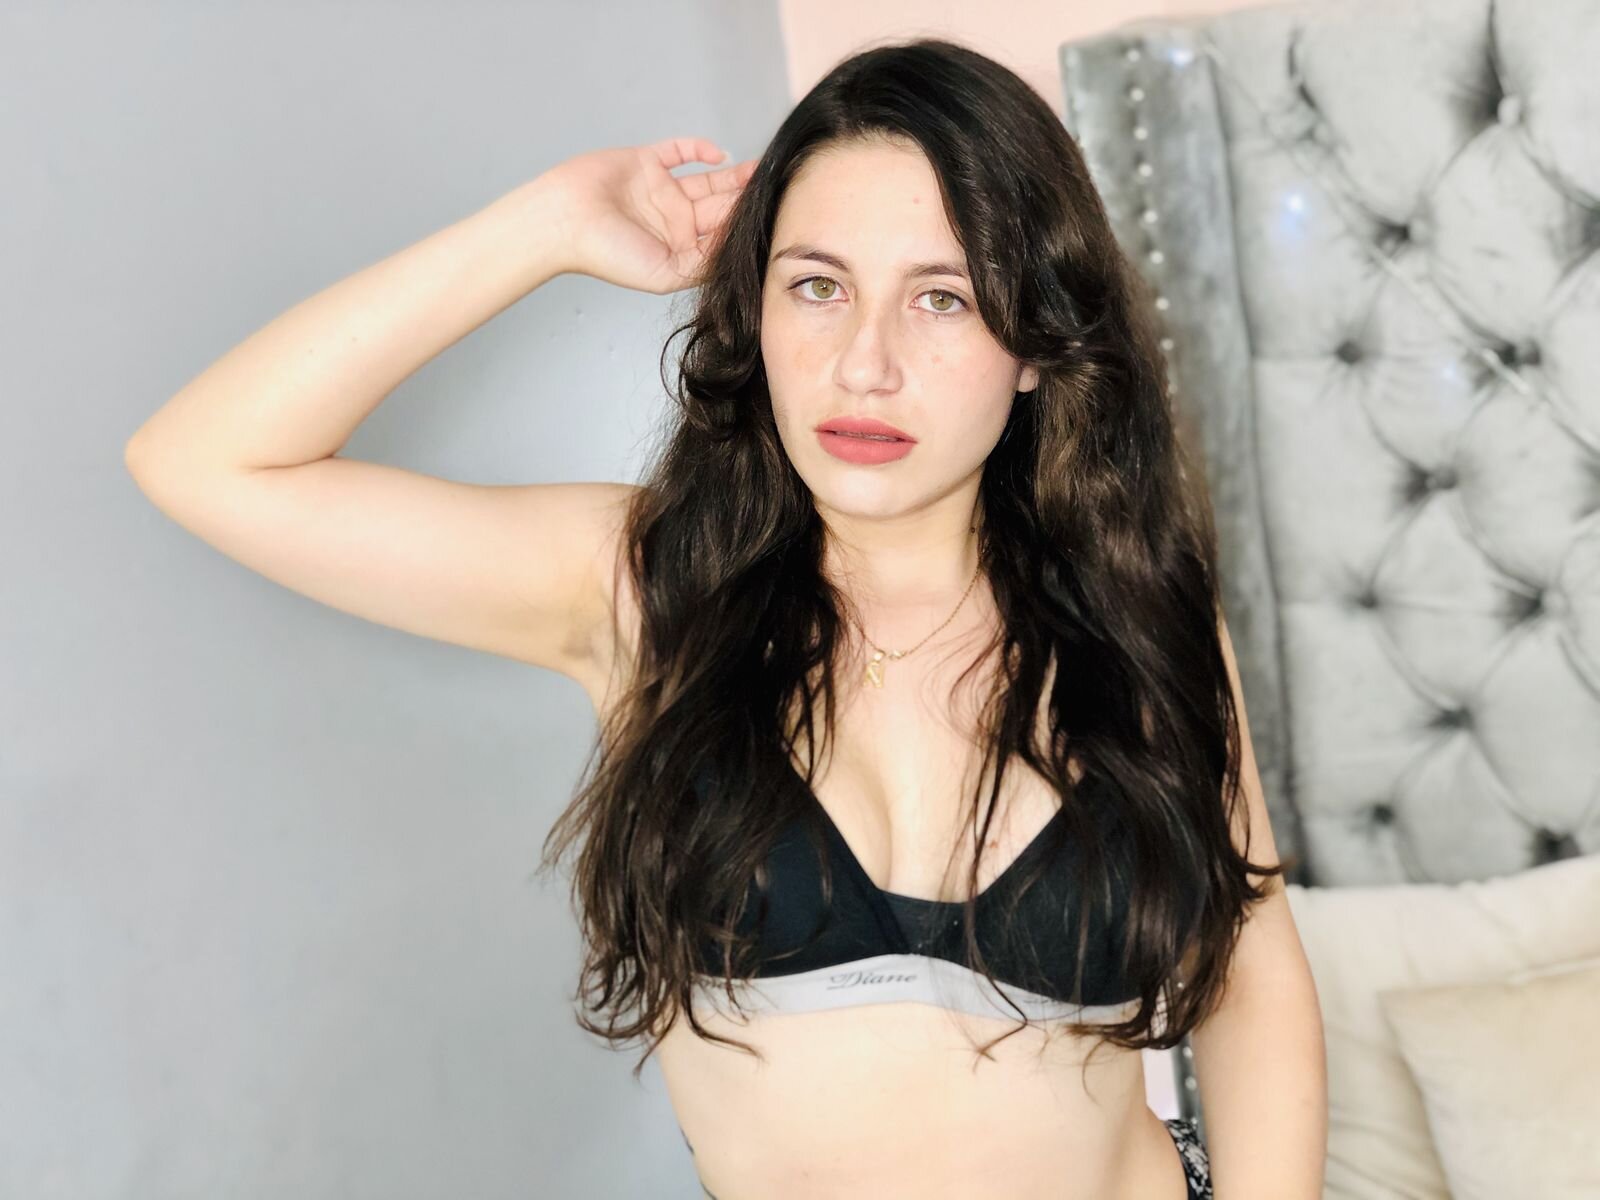 Free Live Sex Chat With CamilaCaicedo